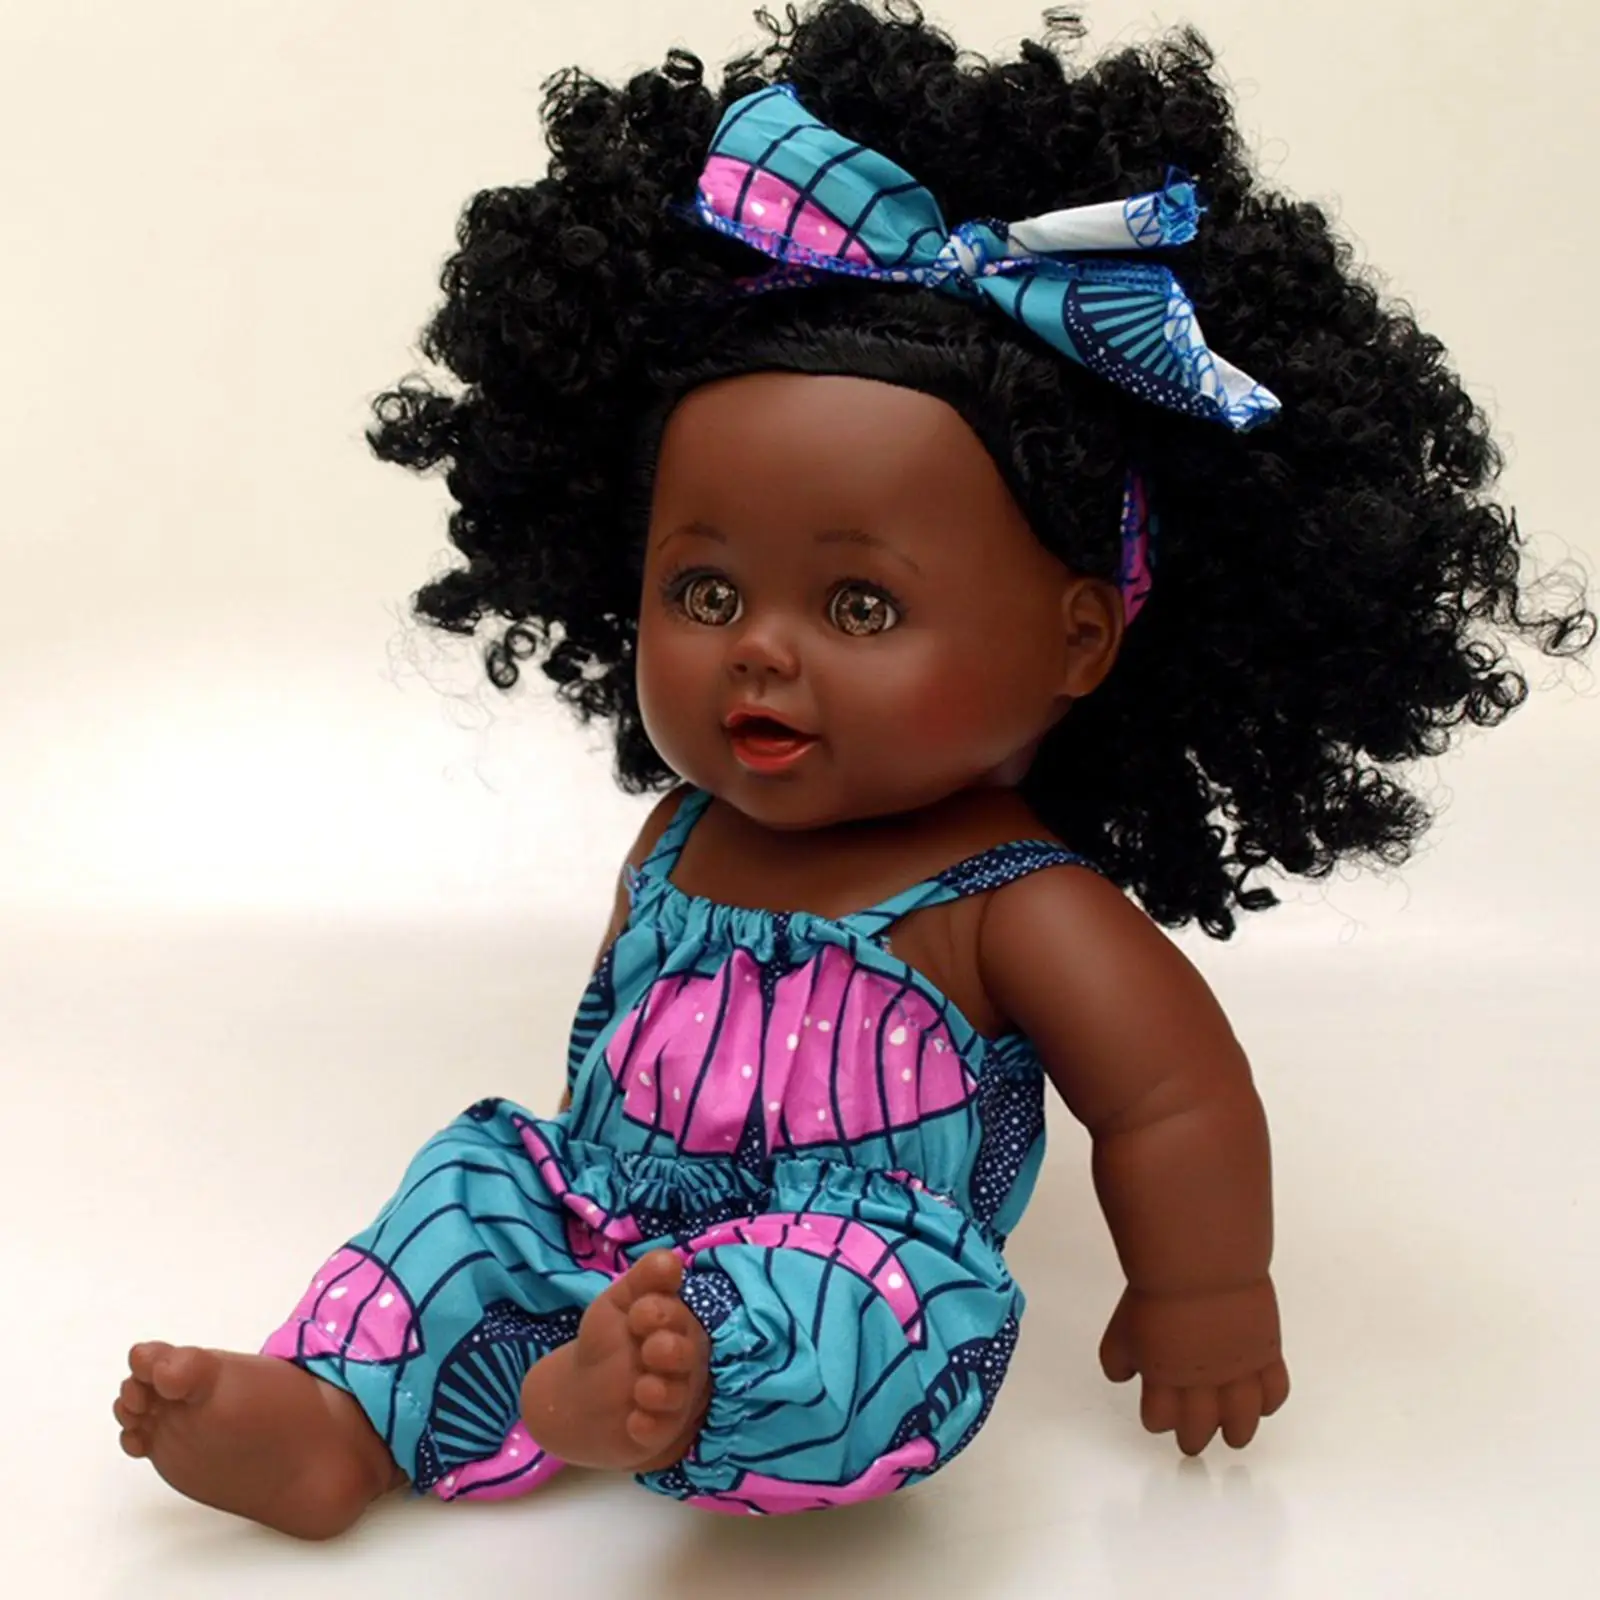 Cute Baby Doll 30cm African with Clothes Vinyl Baby Doll Curly Hair DIY Realistic Washable African Baby Doll for Infants Kids